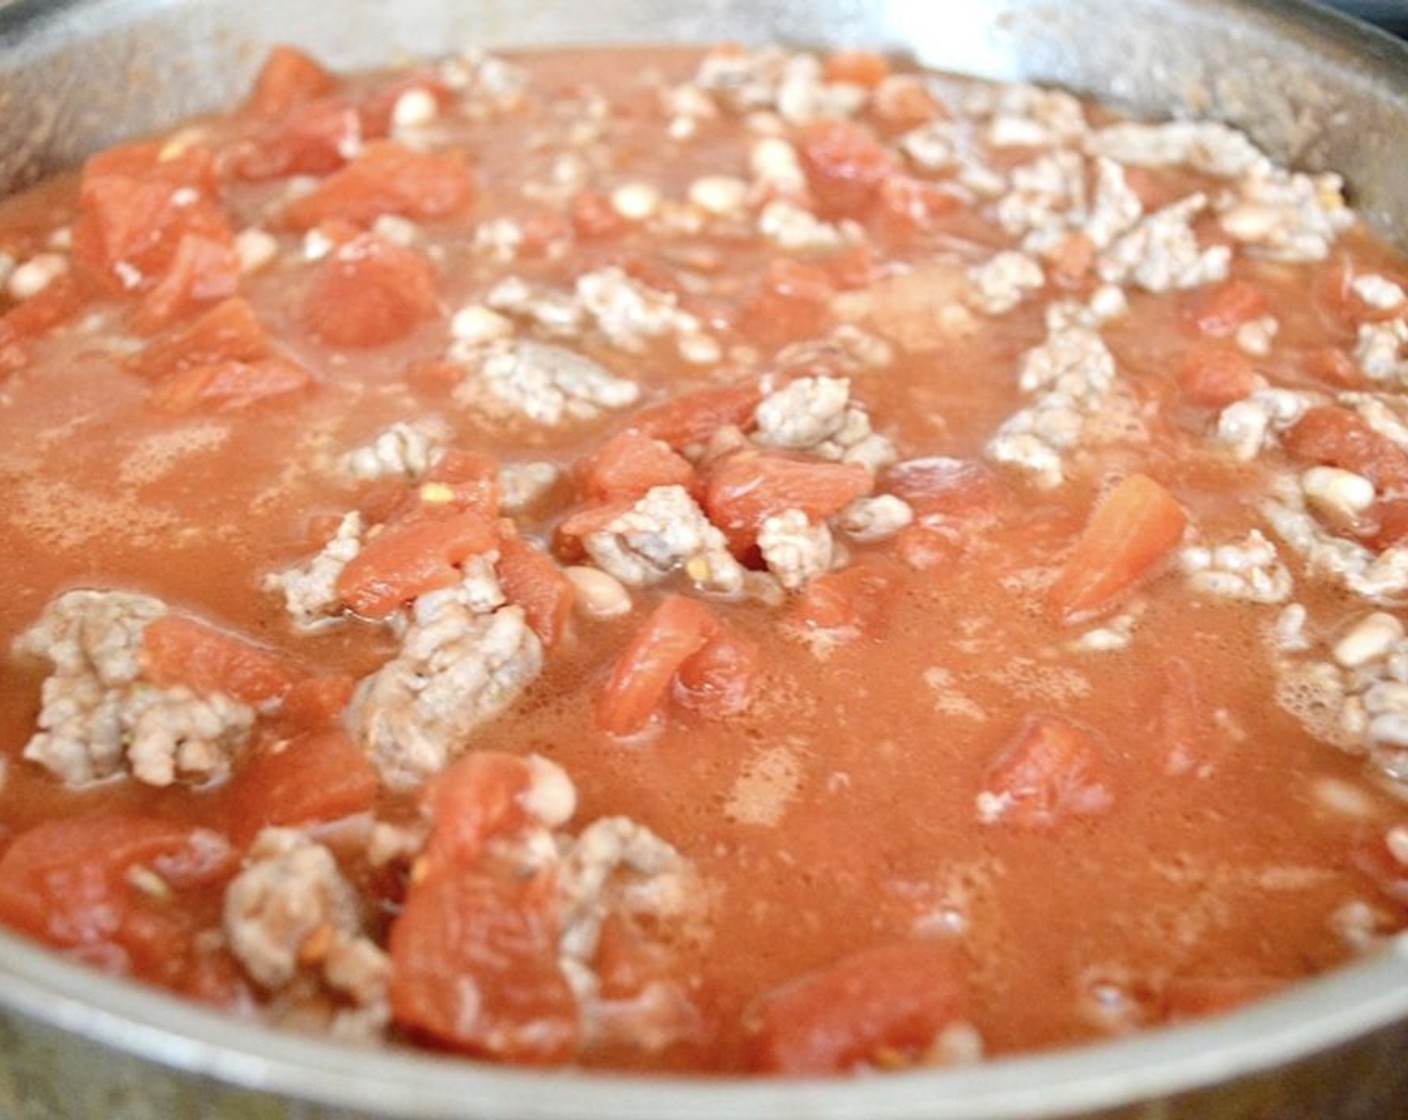 step 4 Add the sausage back in, along with the Diced Tomatoes (2 cans) and Parmesan Cheese (1/2 cup). Season it all generously with the Salt (2 pinches) and Crushed Red Pepper Flakes (2 pinches) and give it a good stir. Let the sauce simmer for 10 minutes.